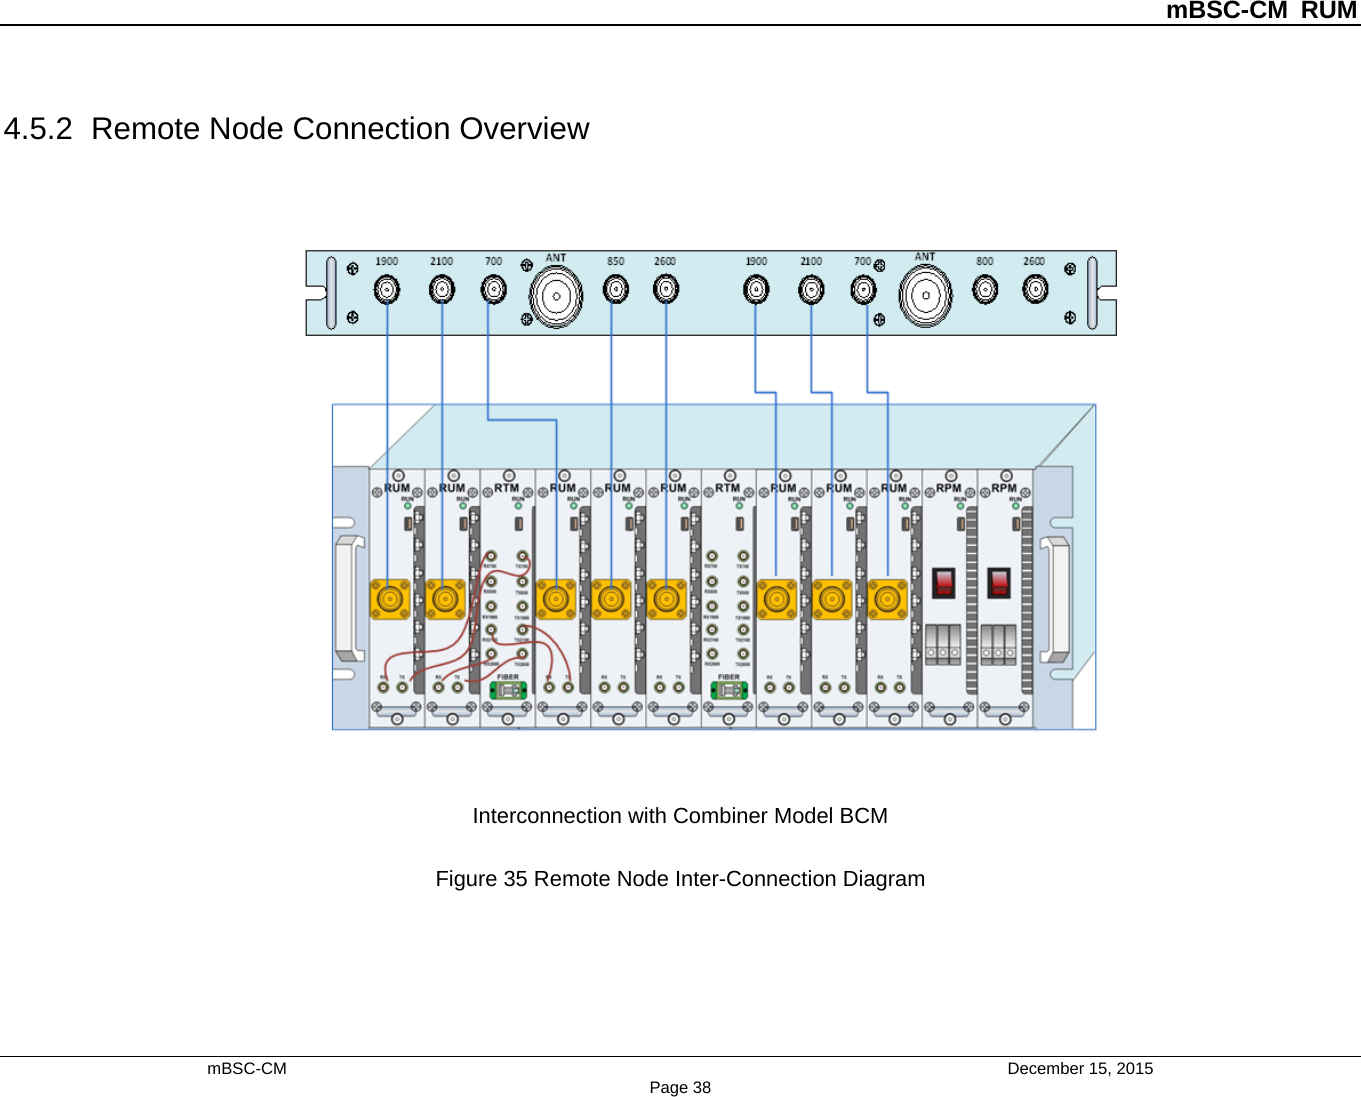          mBSC-CM RUM   mBSC-CM                                 December 15, 2015 Page 38 4.5.2 Remote Node Connection Overview   Interconnection with Combiner Model BCM  Figure 35 Remote Node Inter-Connection Diagram  